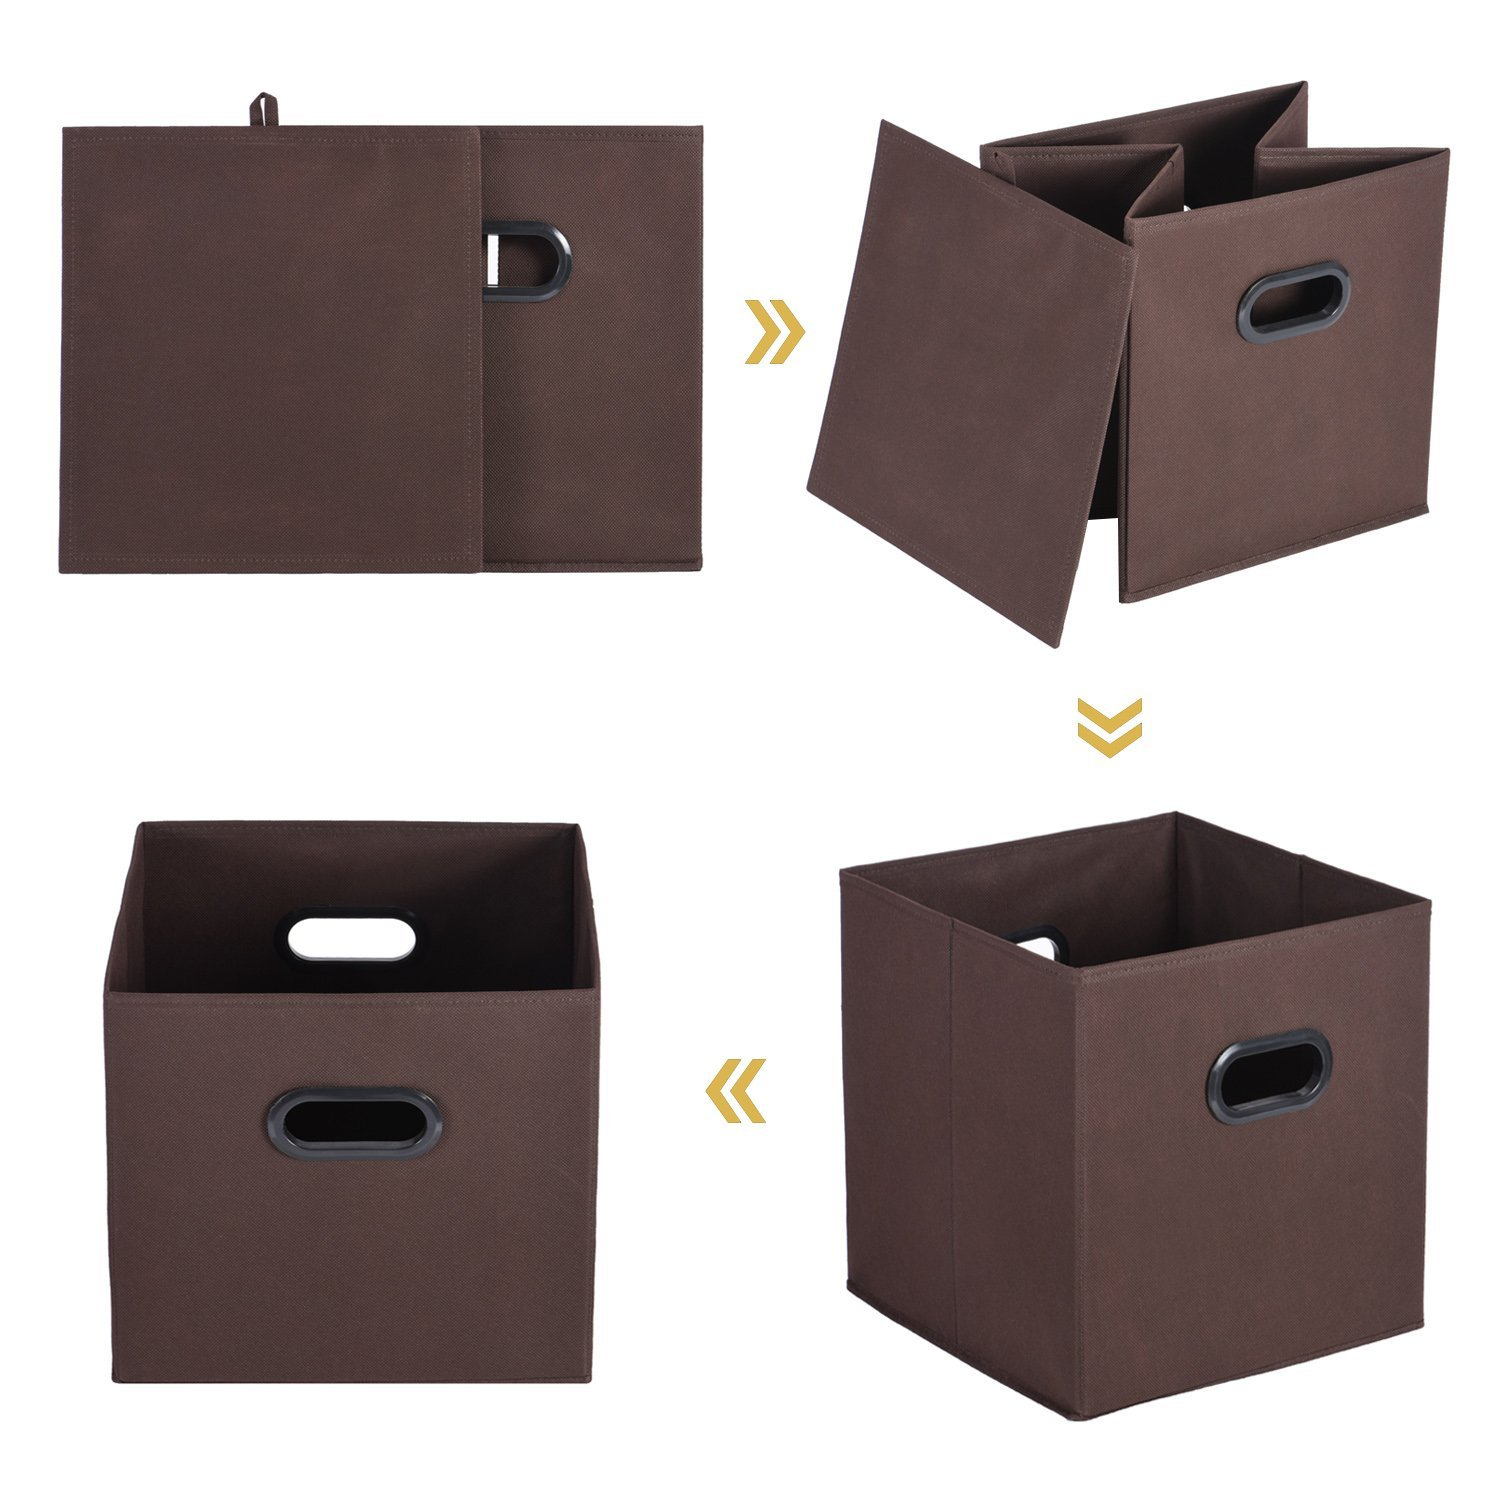 Maidmax Cloth Storage Bins Cubes Baskets Containers With Dual throughout size 1500 X 1500